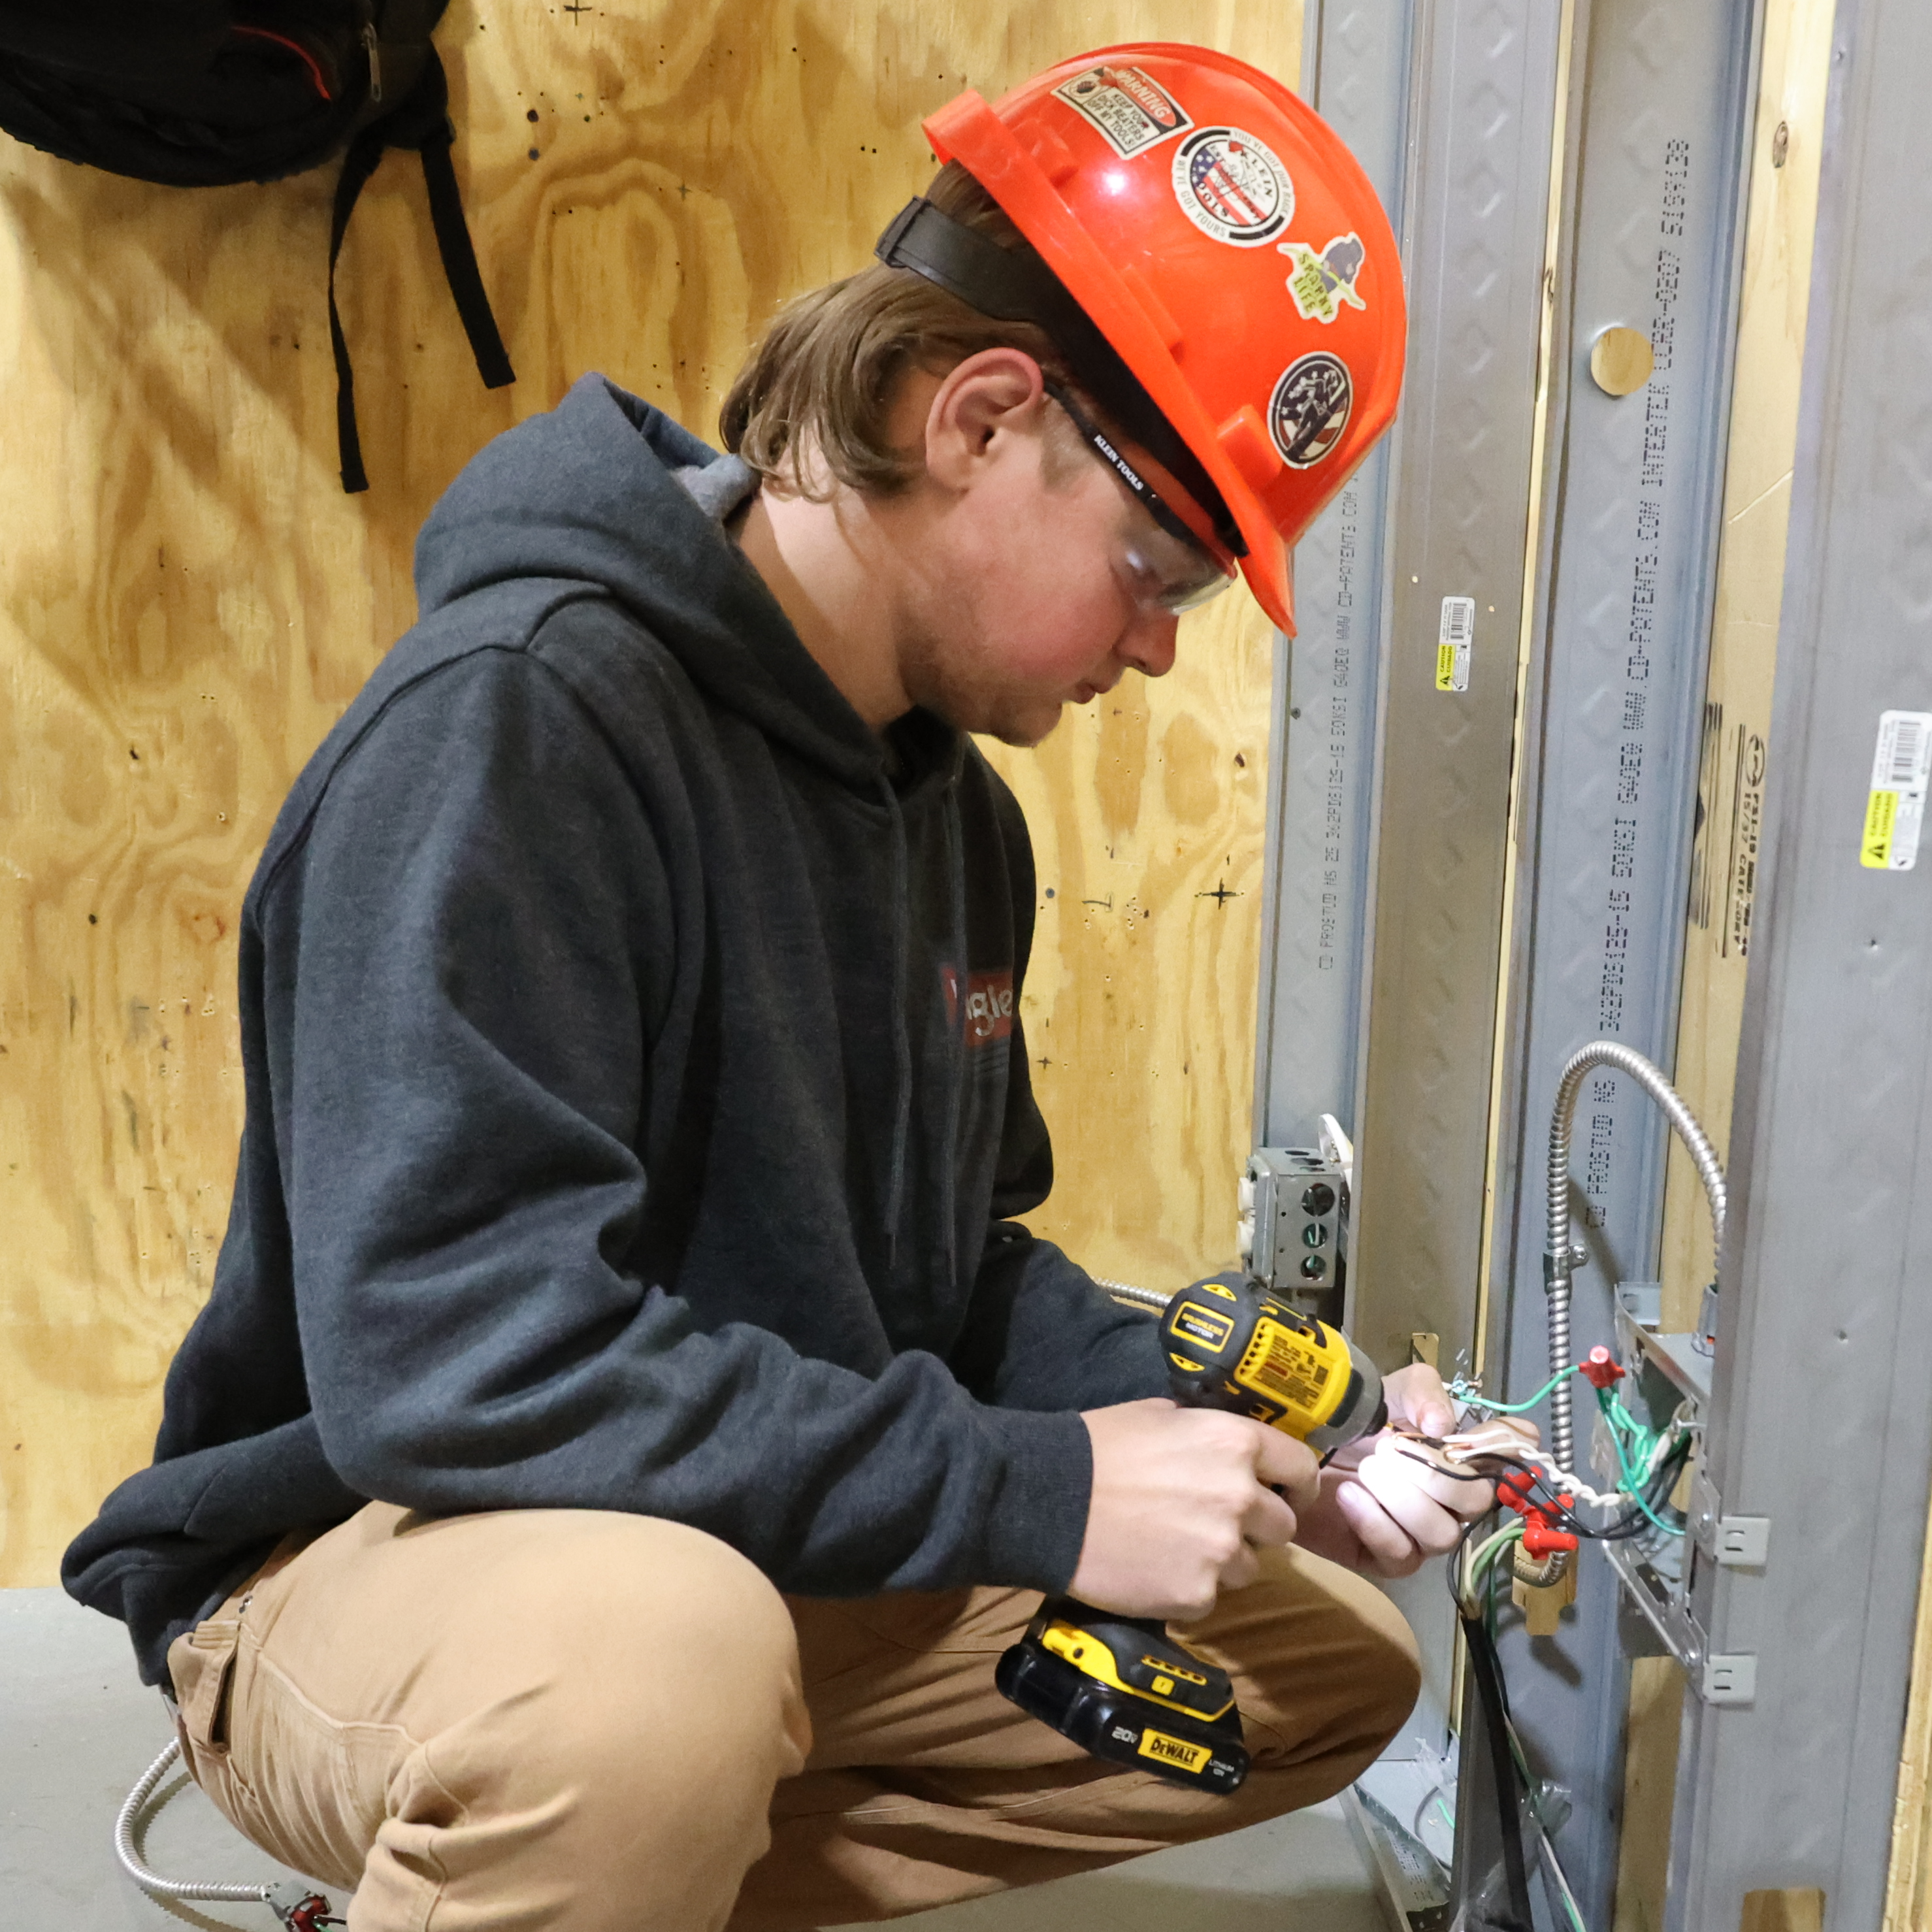 A White, male student wearing an orange hard hat holds a hand drill up to some loose cords on his wall work station.